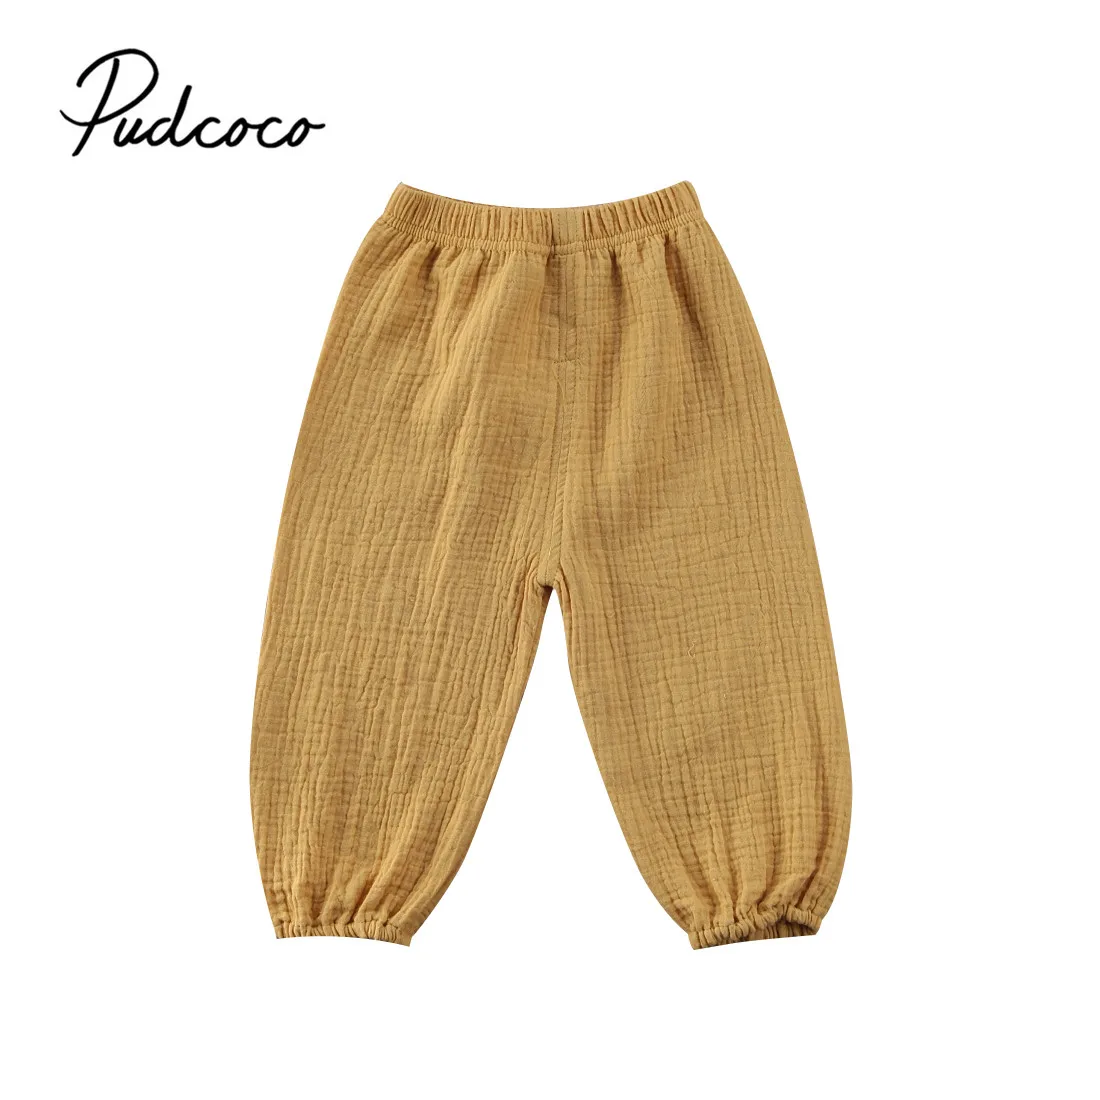 

2017 Brand New Toddler Infant Child Baby Girls Boy Pants Wrinkled Cotton Vintage Bloomers Trousers Legging Solid Pants 6M-4T